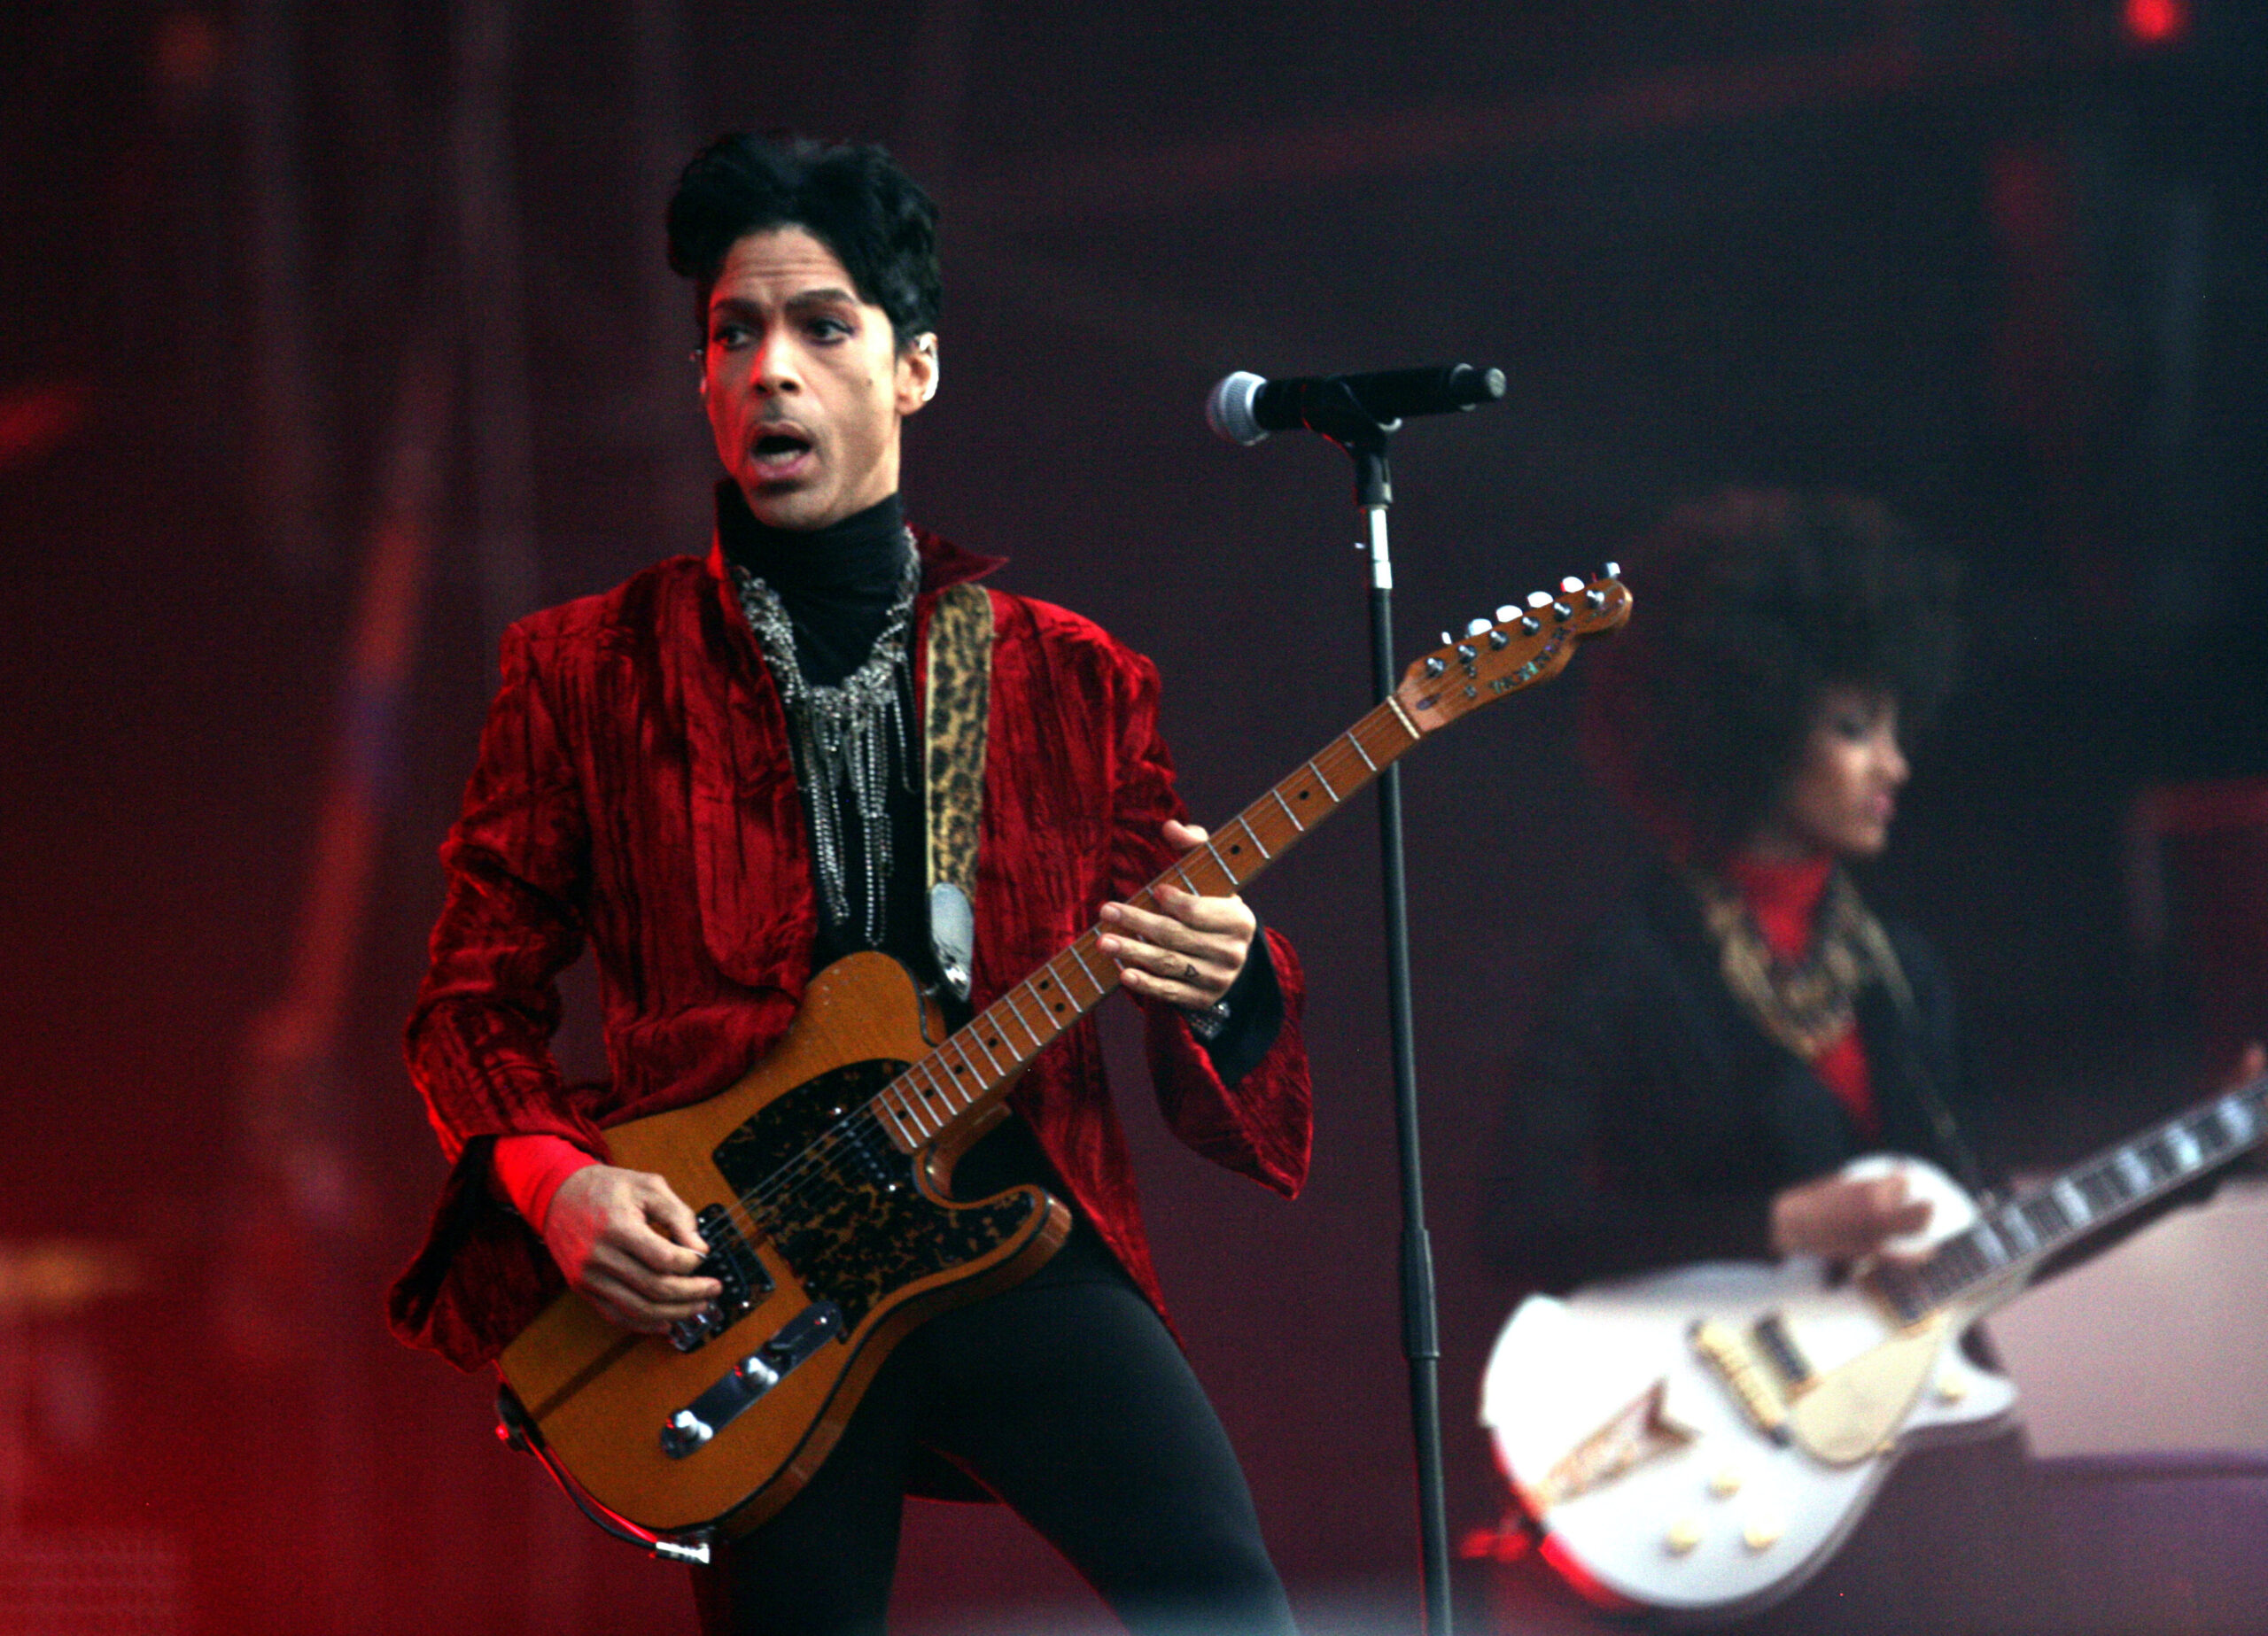 highest paid dead celebrities of 2020, Prince jamming